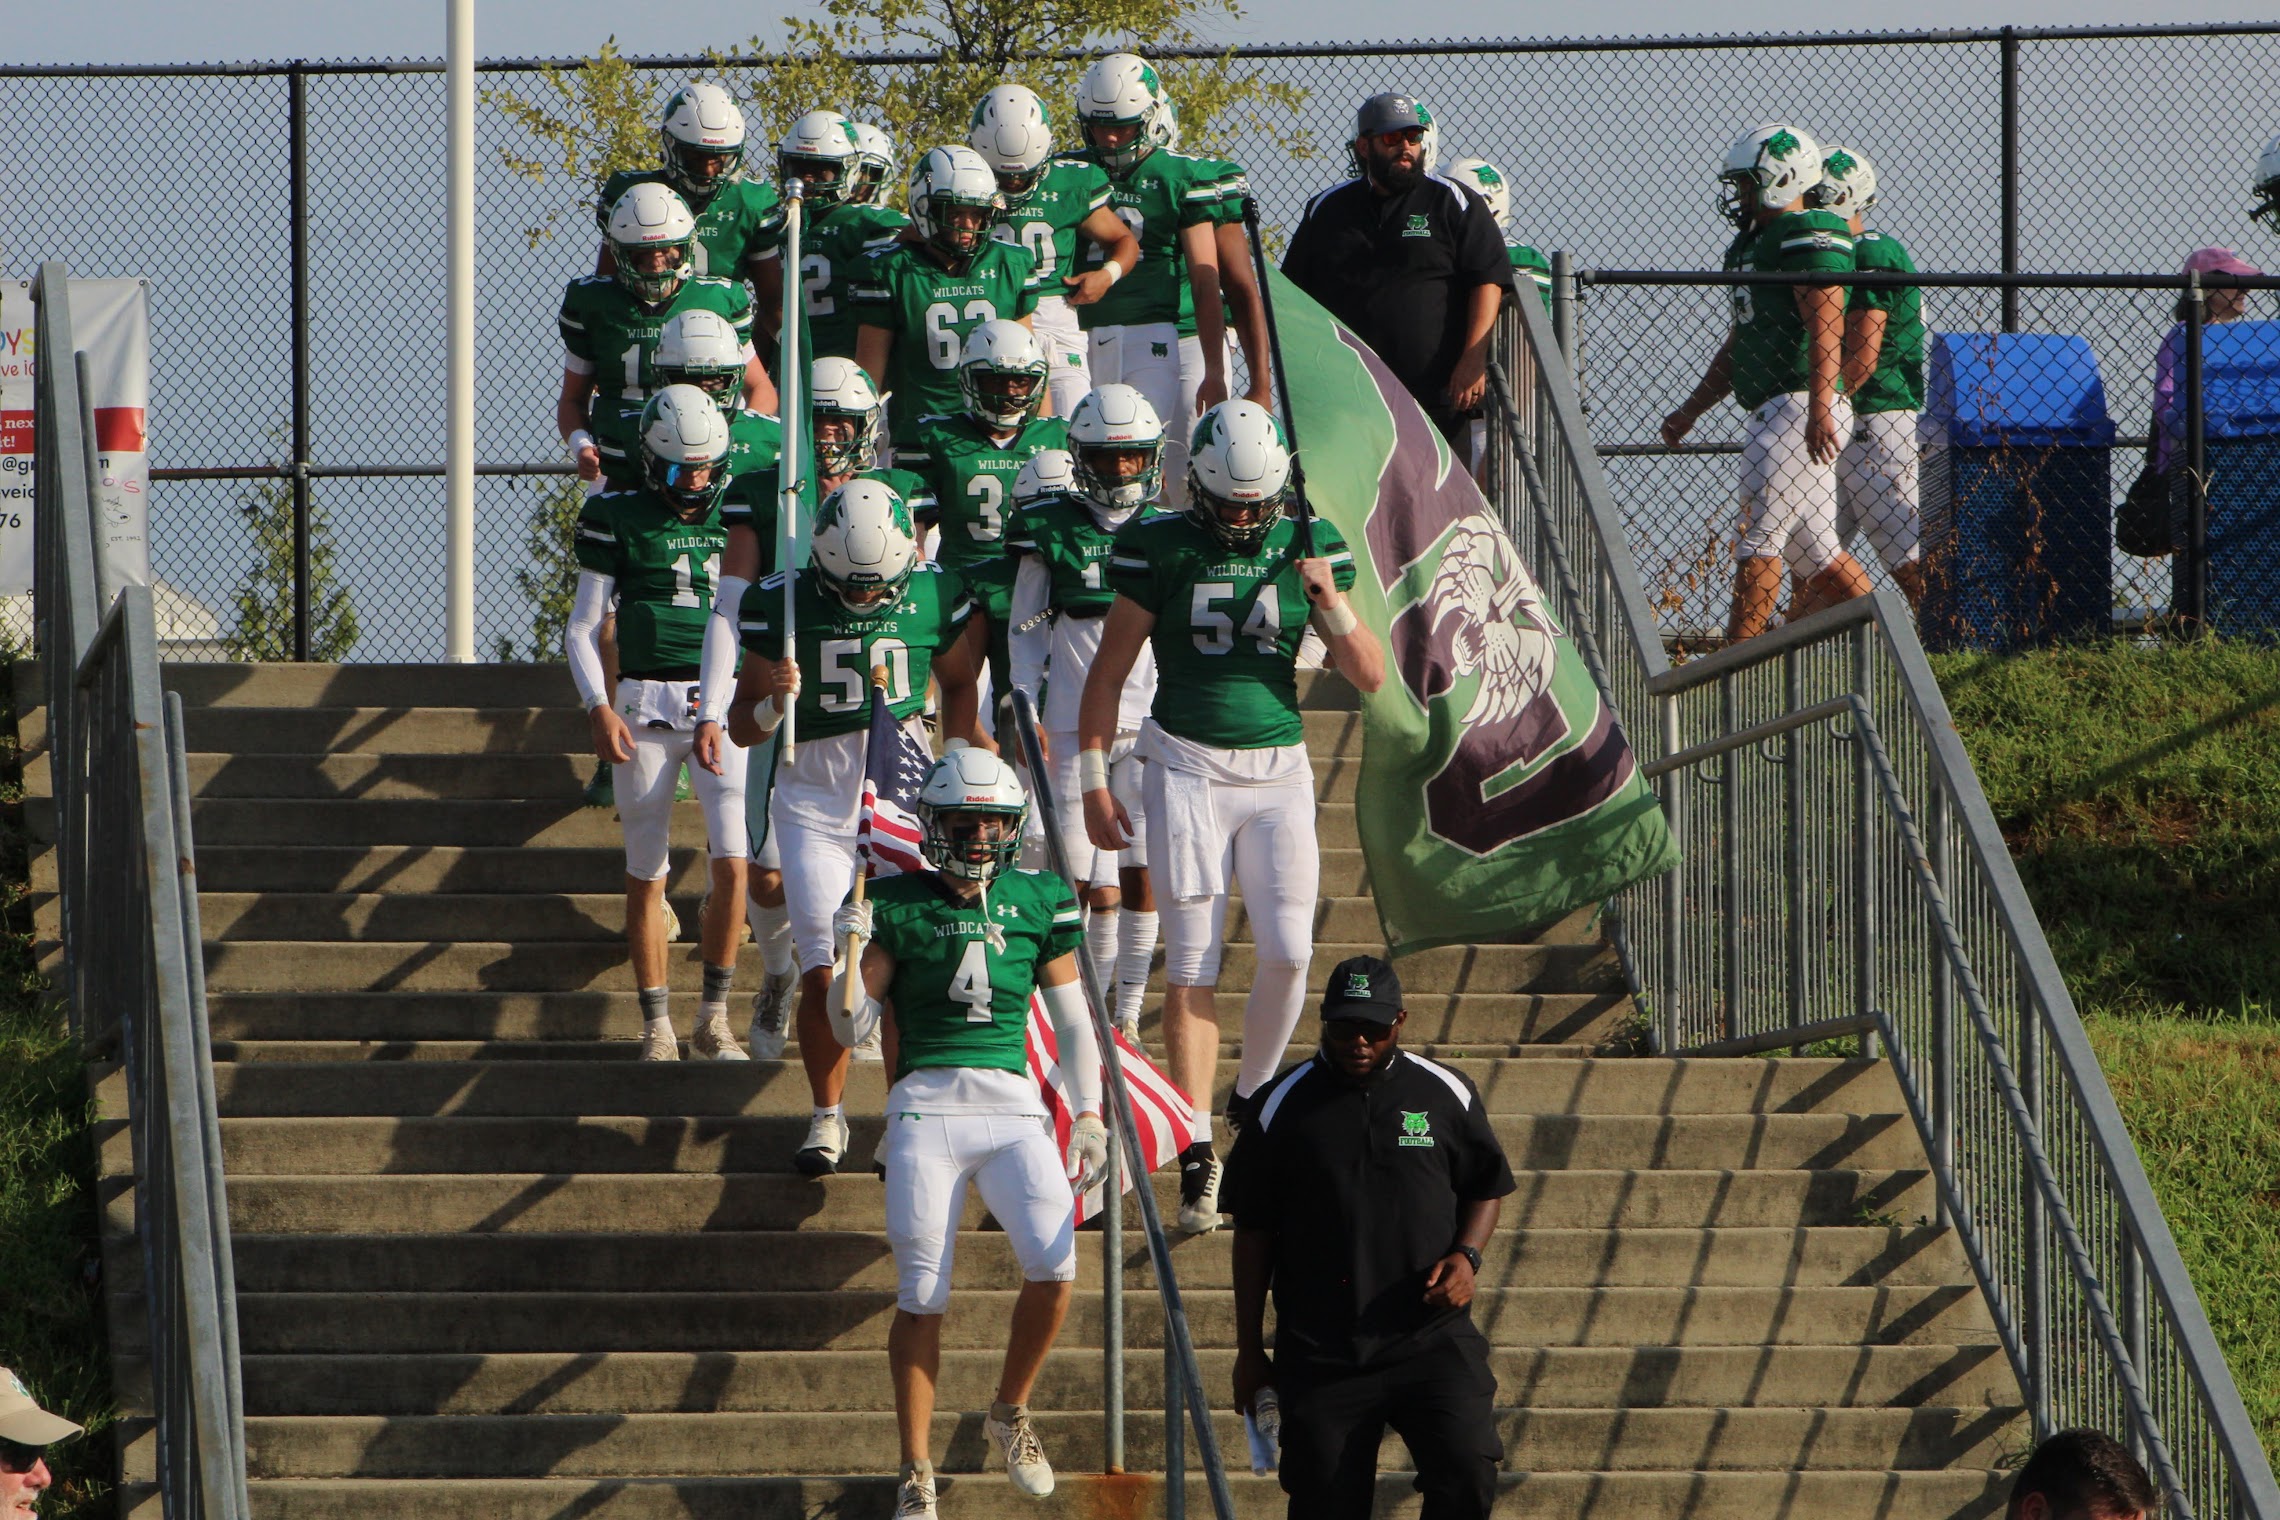 The Wildcats make a statement entrance as they prepare to take on Richard Montgomery. WJ would go on to win the game 53-22 and improve to 2-0 on the season.